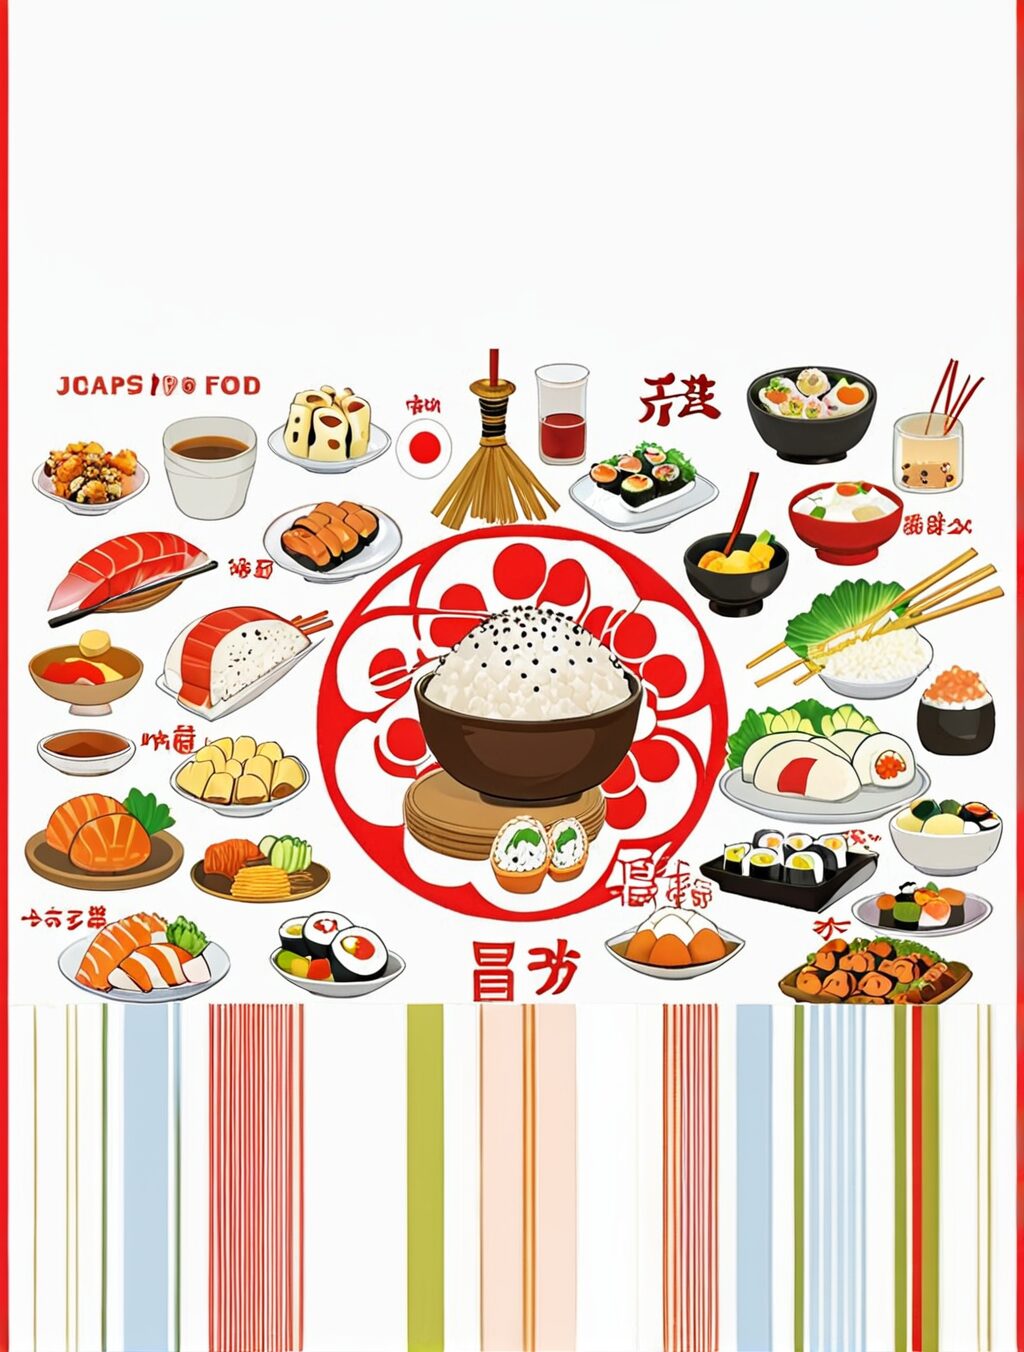 japan food facts for kids